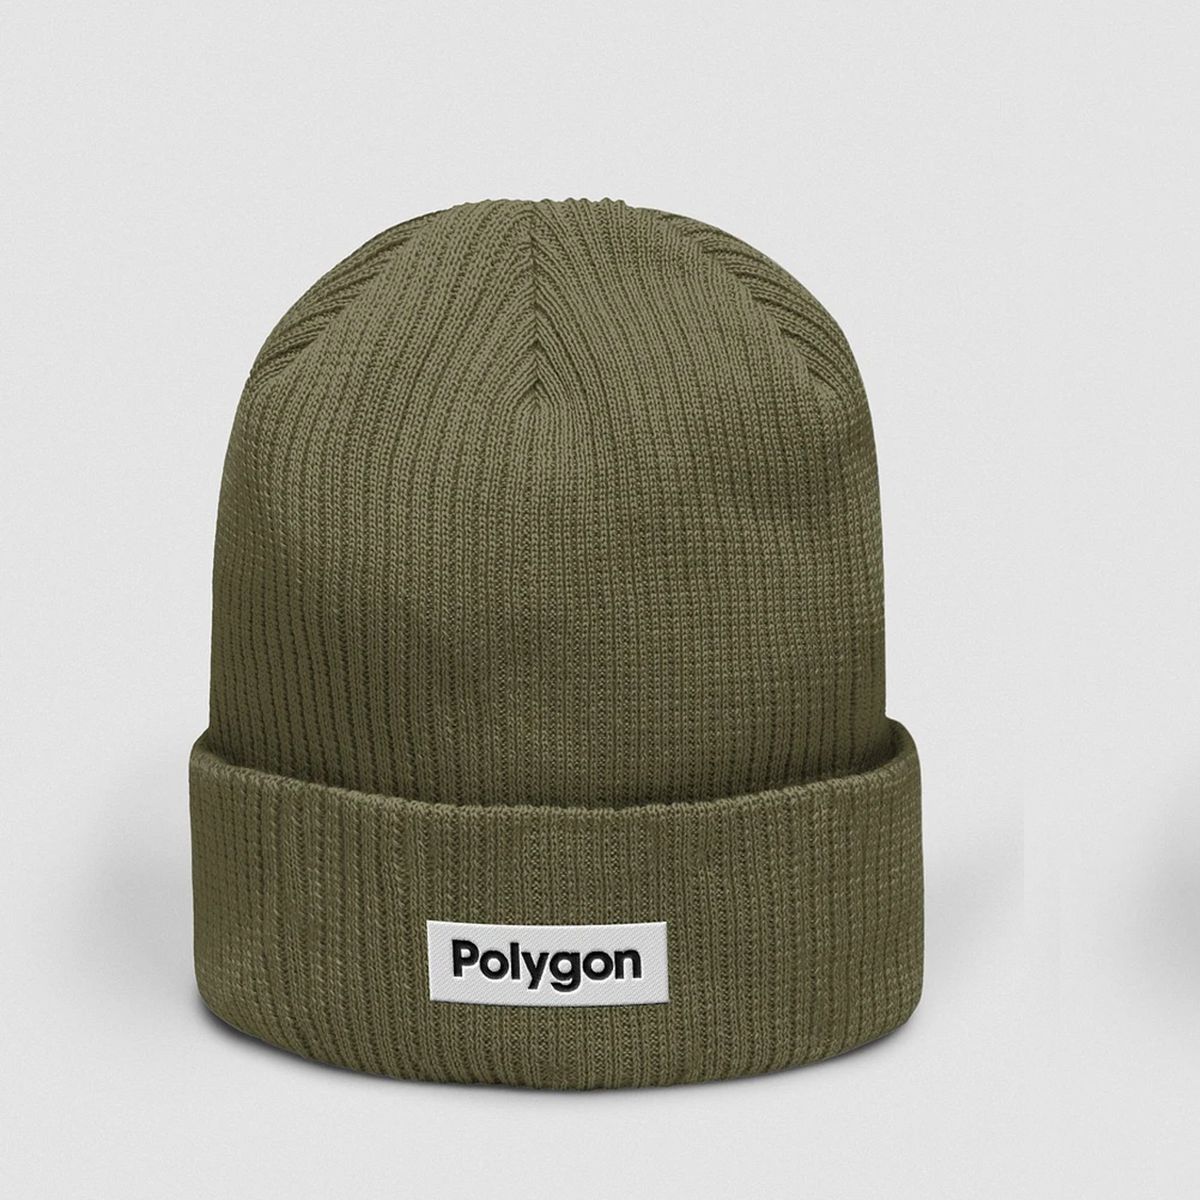 Polygon’s official beanies come in olive, dark red, black, and navy